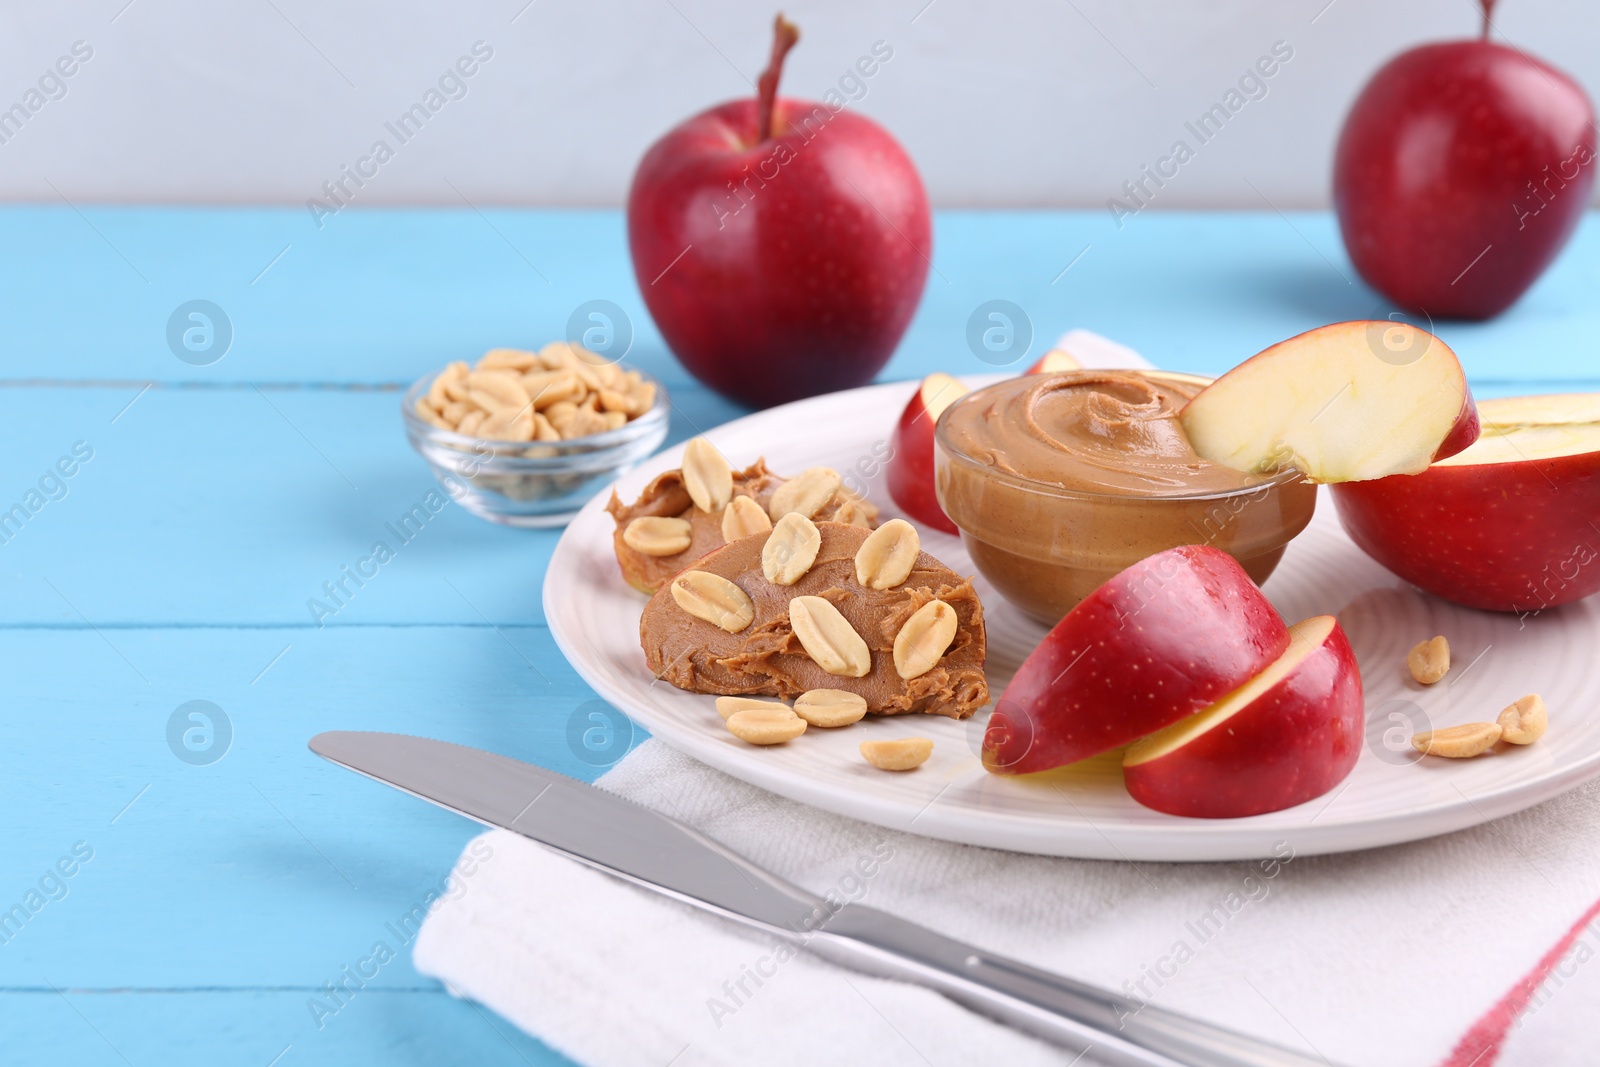 Photo of Slices of fresh apple with peanut butter, nuts and knife on light blue wooden table